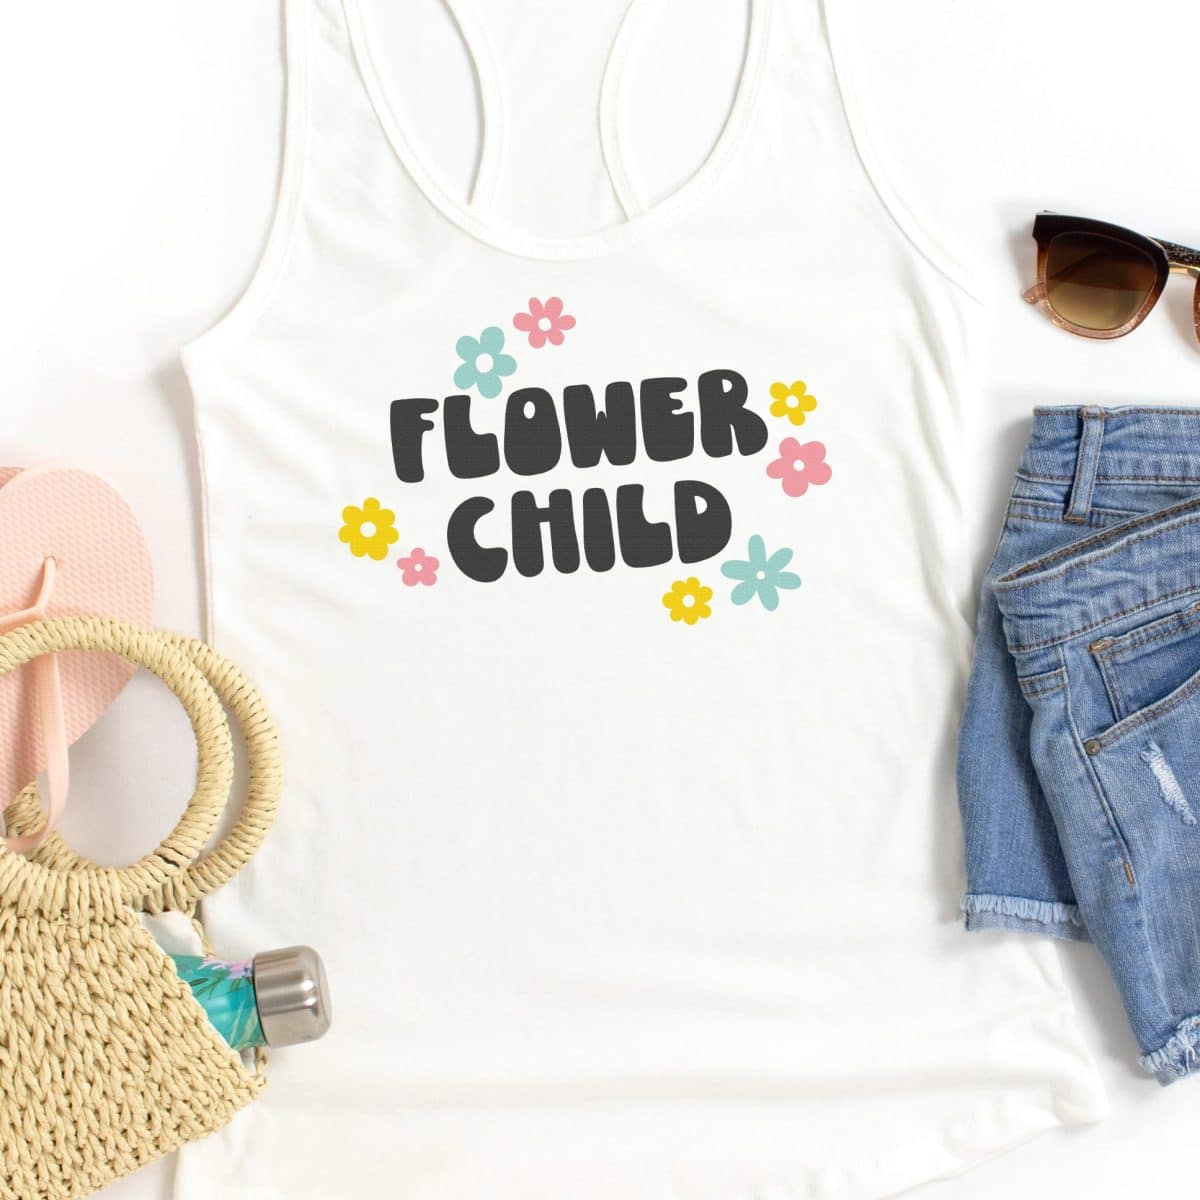 Flower Child by Hey Let's Make Stuff